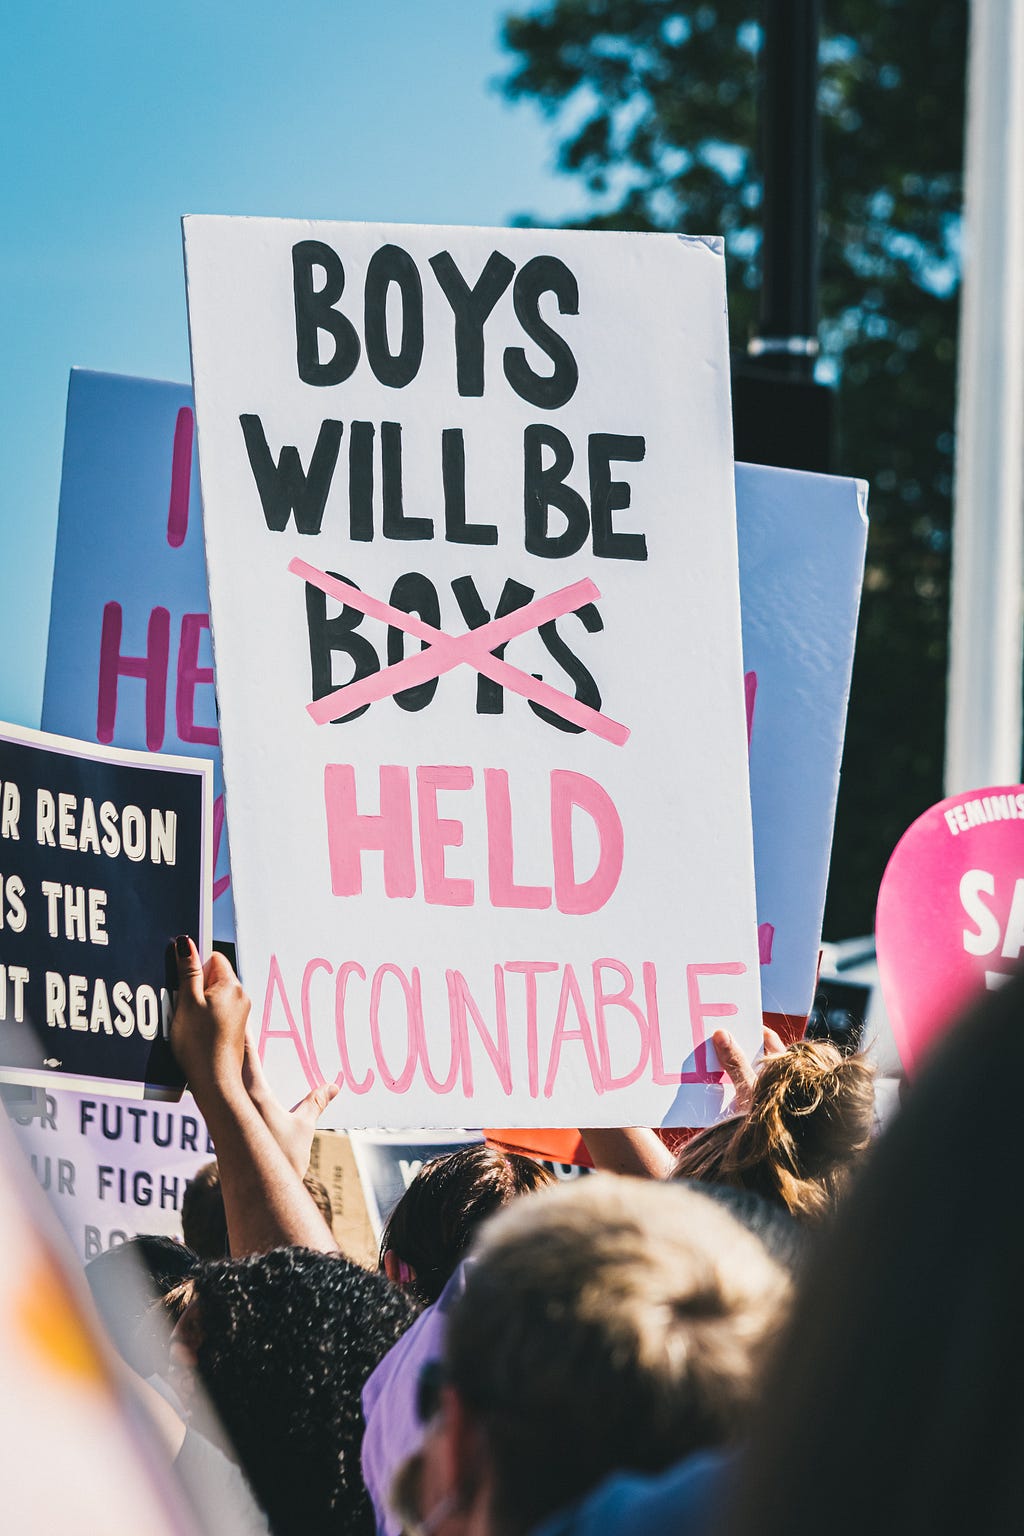 A protest sign in a forest of protest signs, emblazoned with “Boys will be held accountable” against a brilliant blue sky. Manicured hands thrust the sign skyward in defiance.